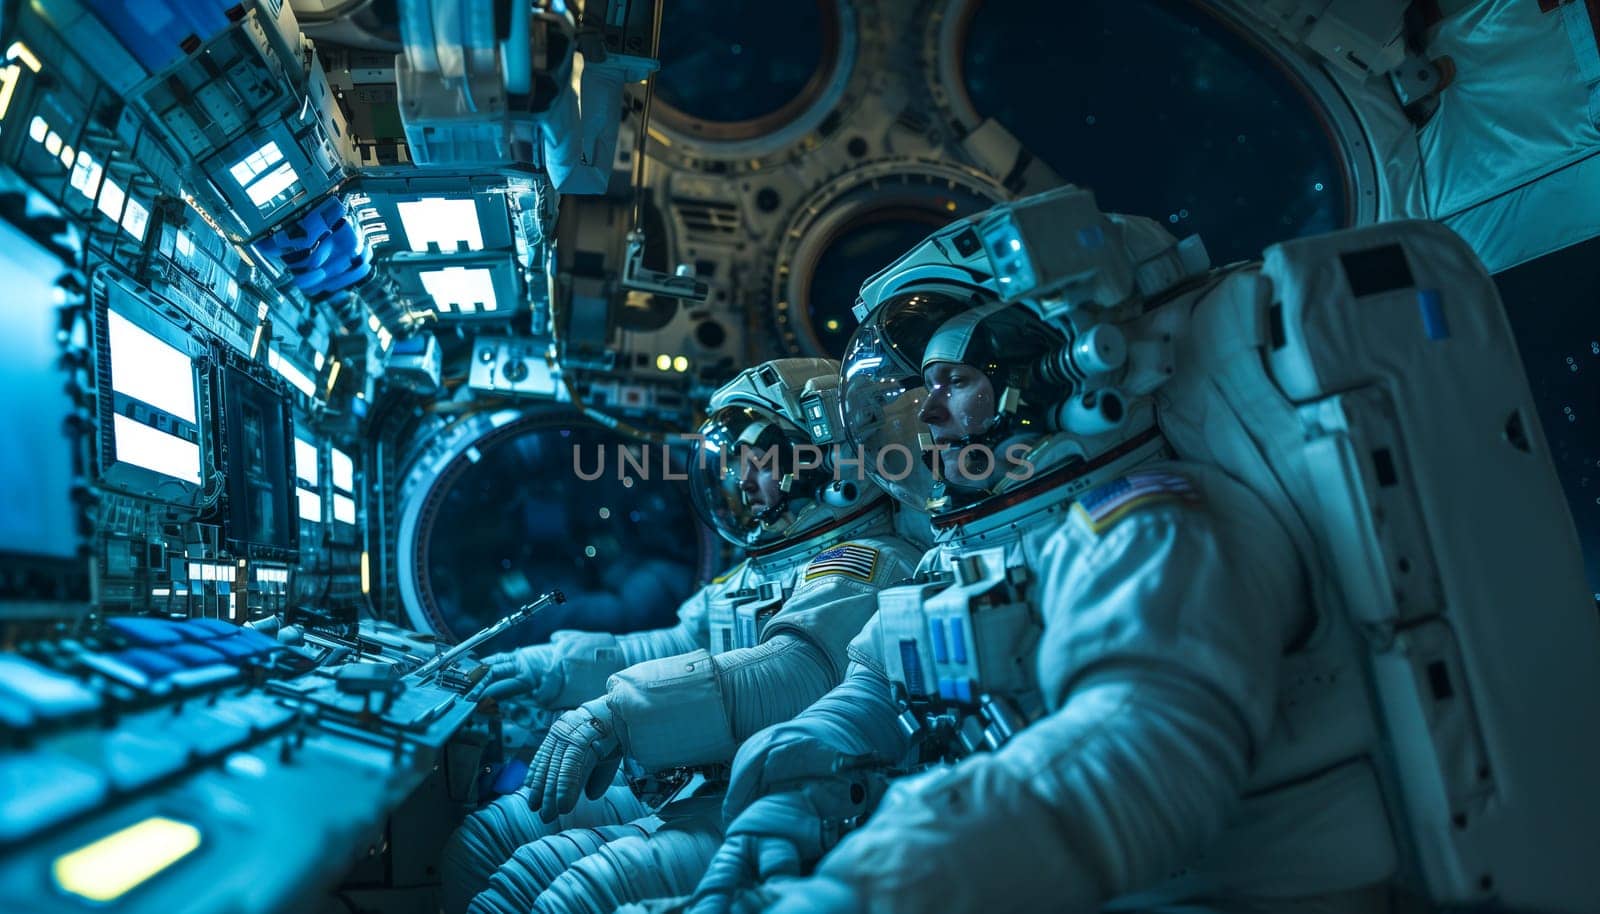 Two astronauts using control panel while orbiting around a planet in a spaceship.